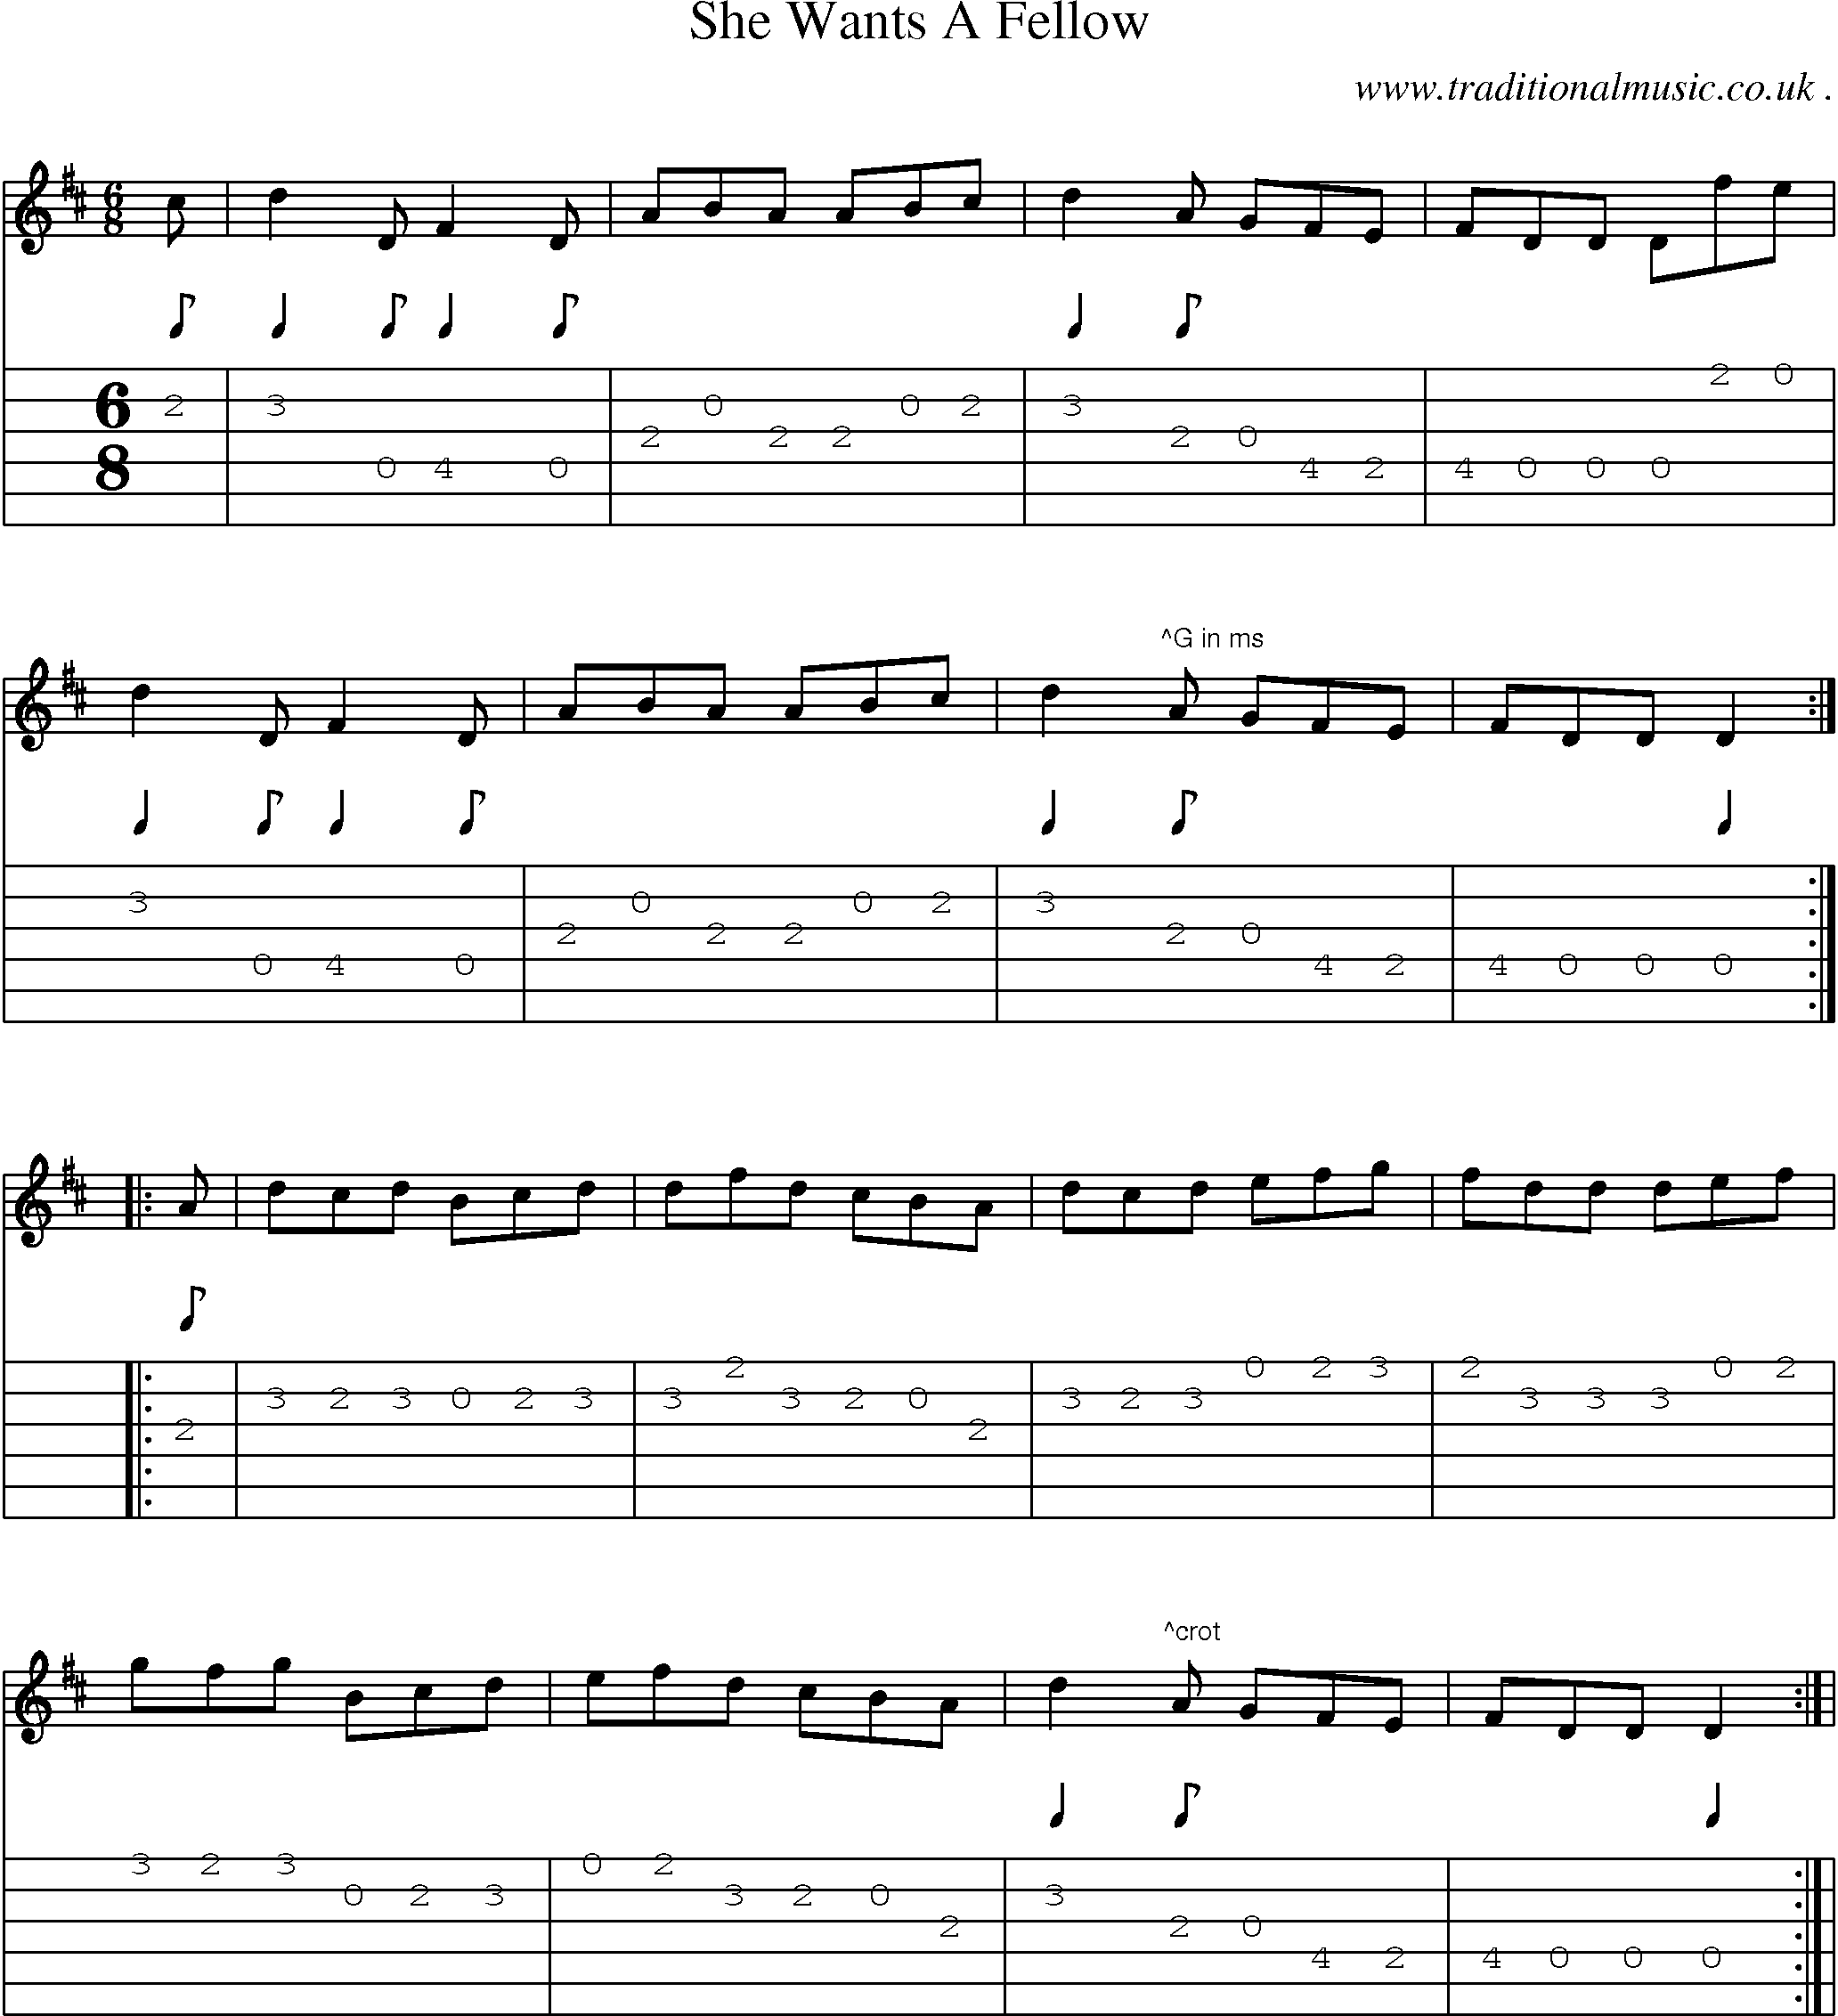 Sheet-Music and Guitar Tabs for She Wants A Fellow